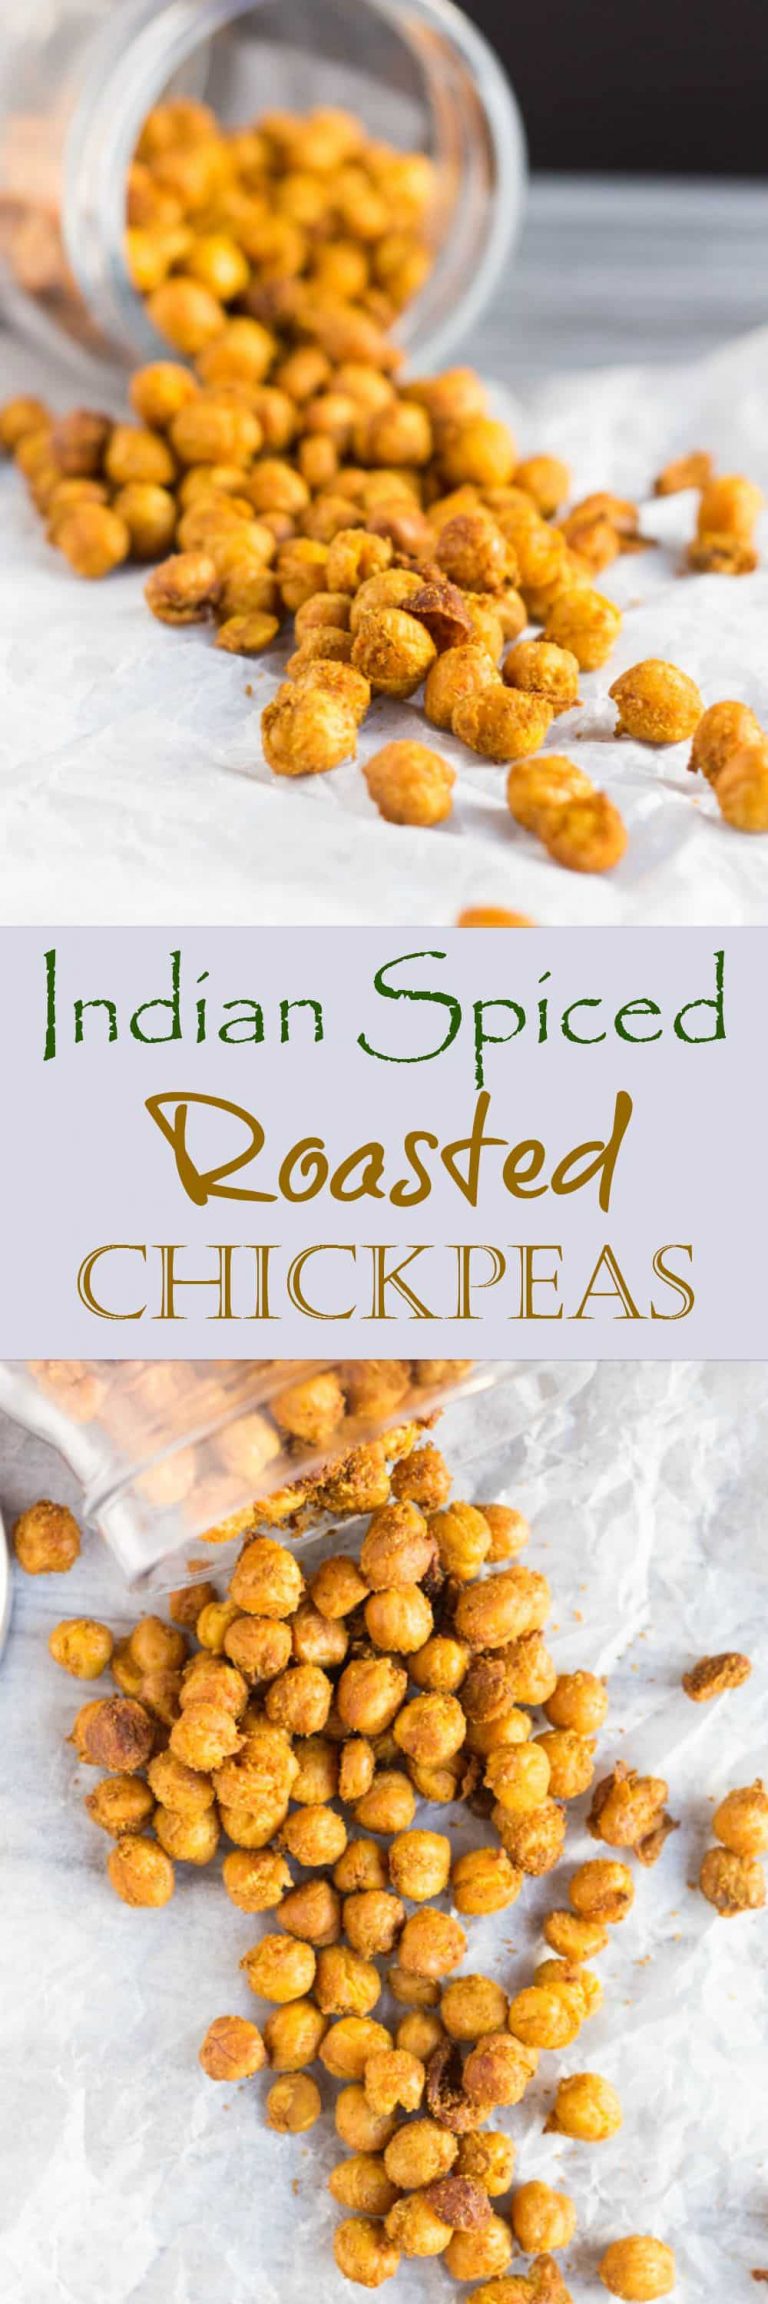 Indian Spiced Roasted Chickpeas